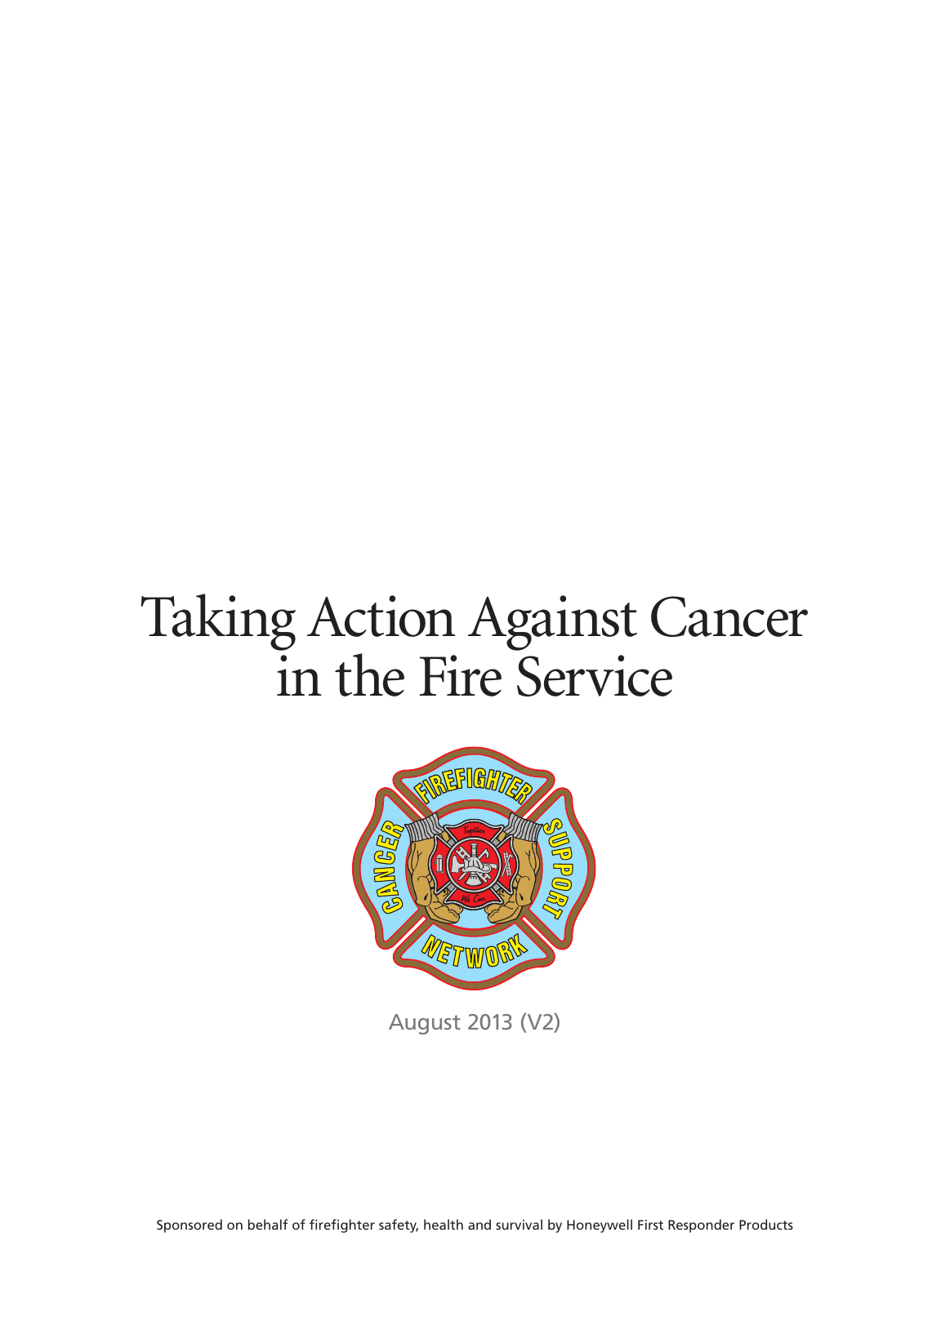 Taking Action Against Cancer in the Fire Service document on Templateroller.com